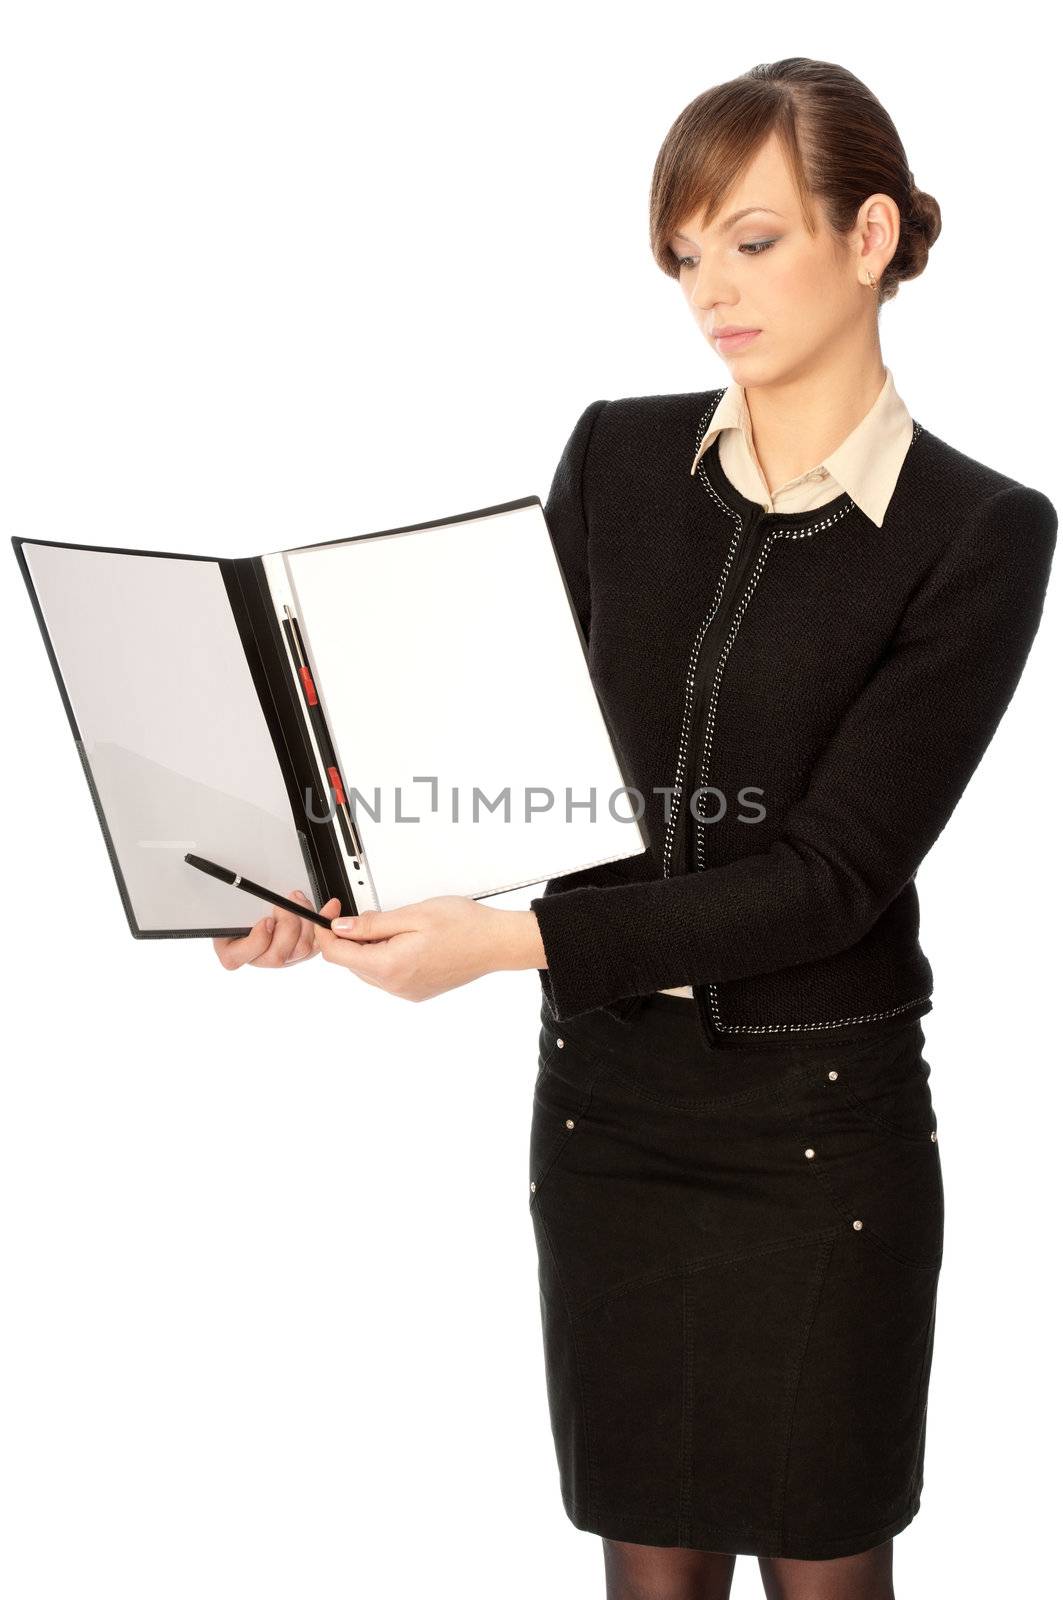 The new worker holds the white blank paper in the folder and making presentation